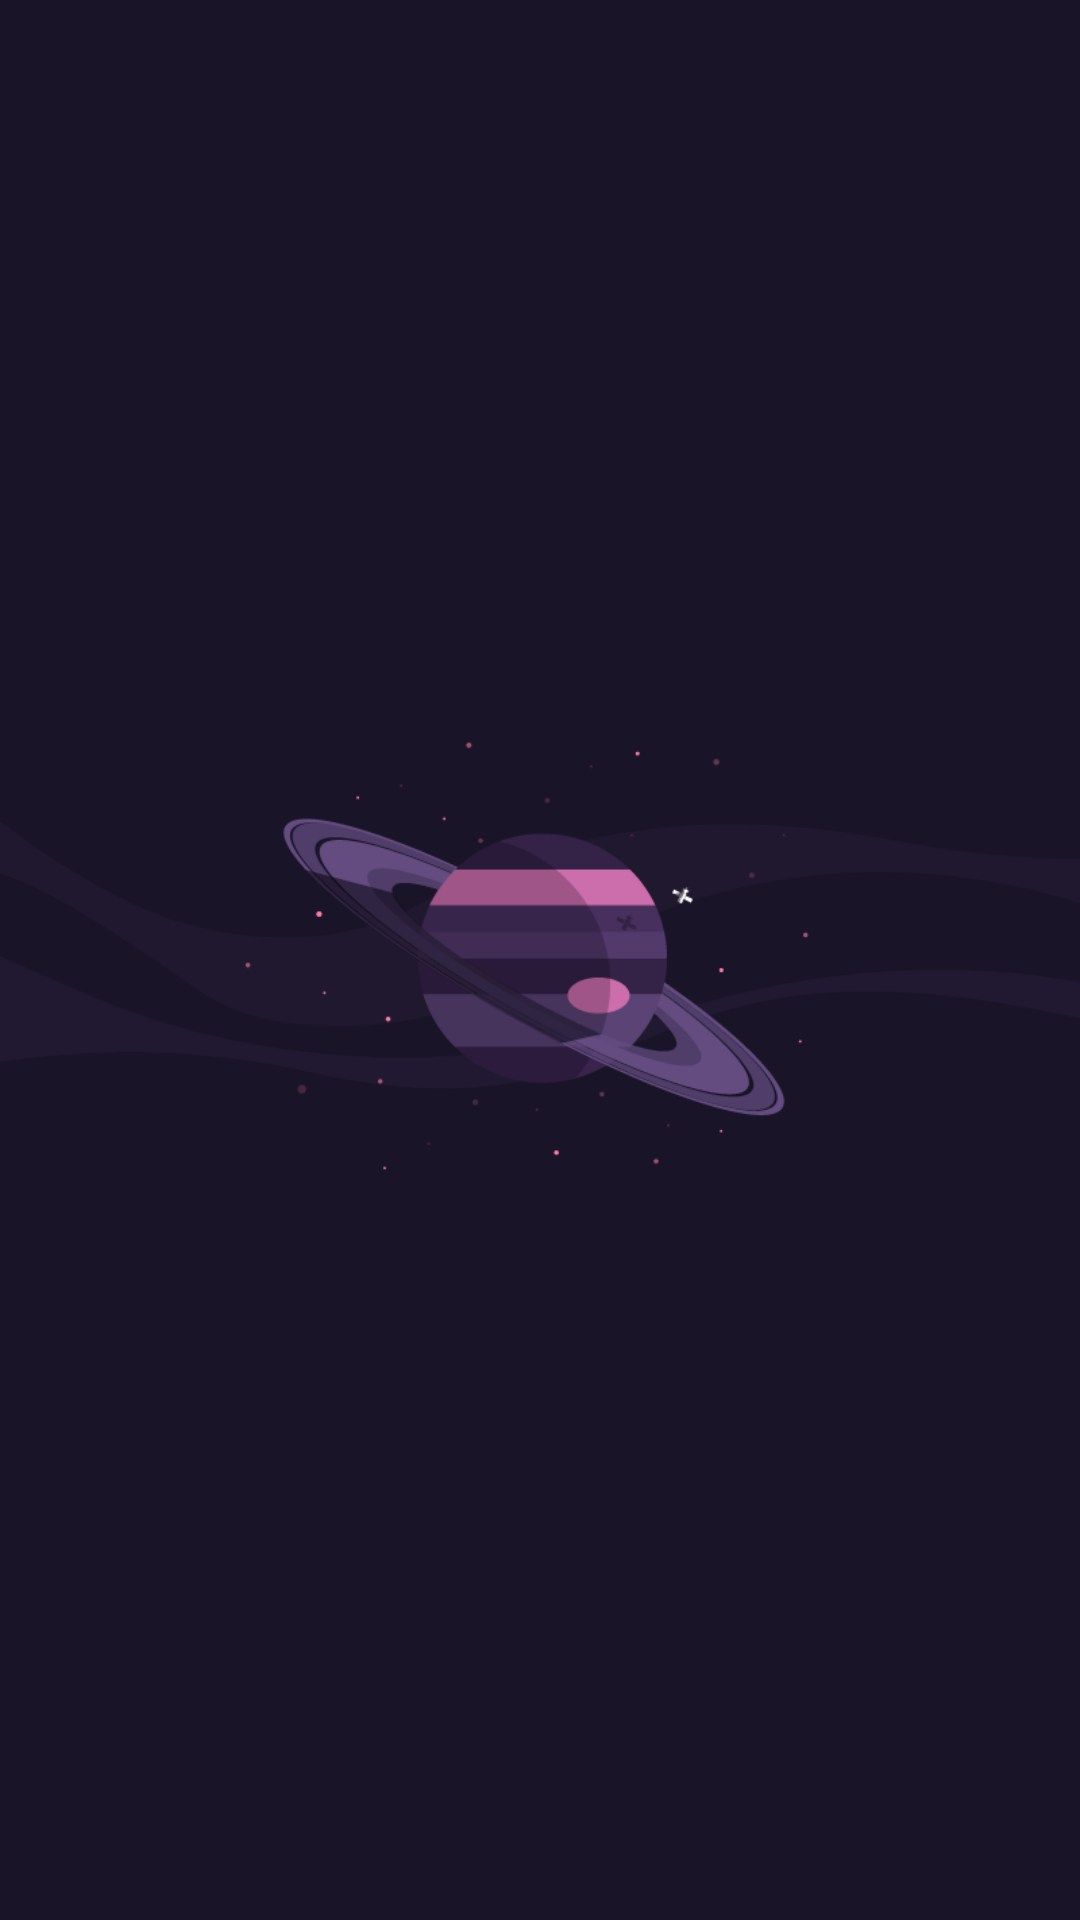 Minimalist planet wallpapers : iphonewallpapers